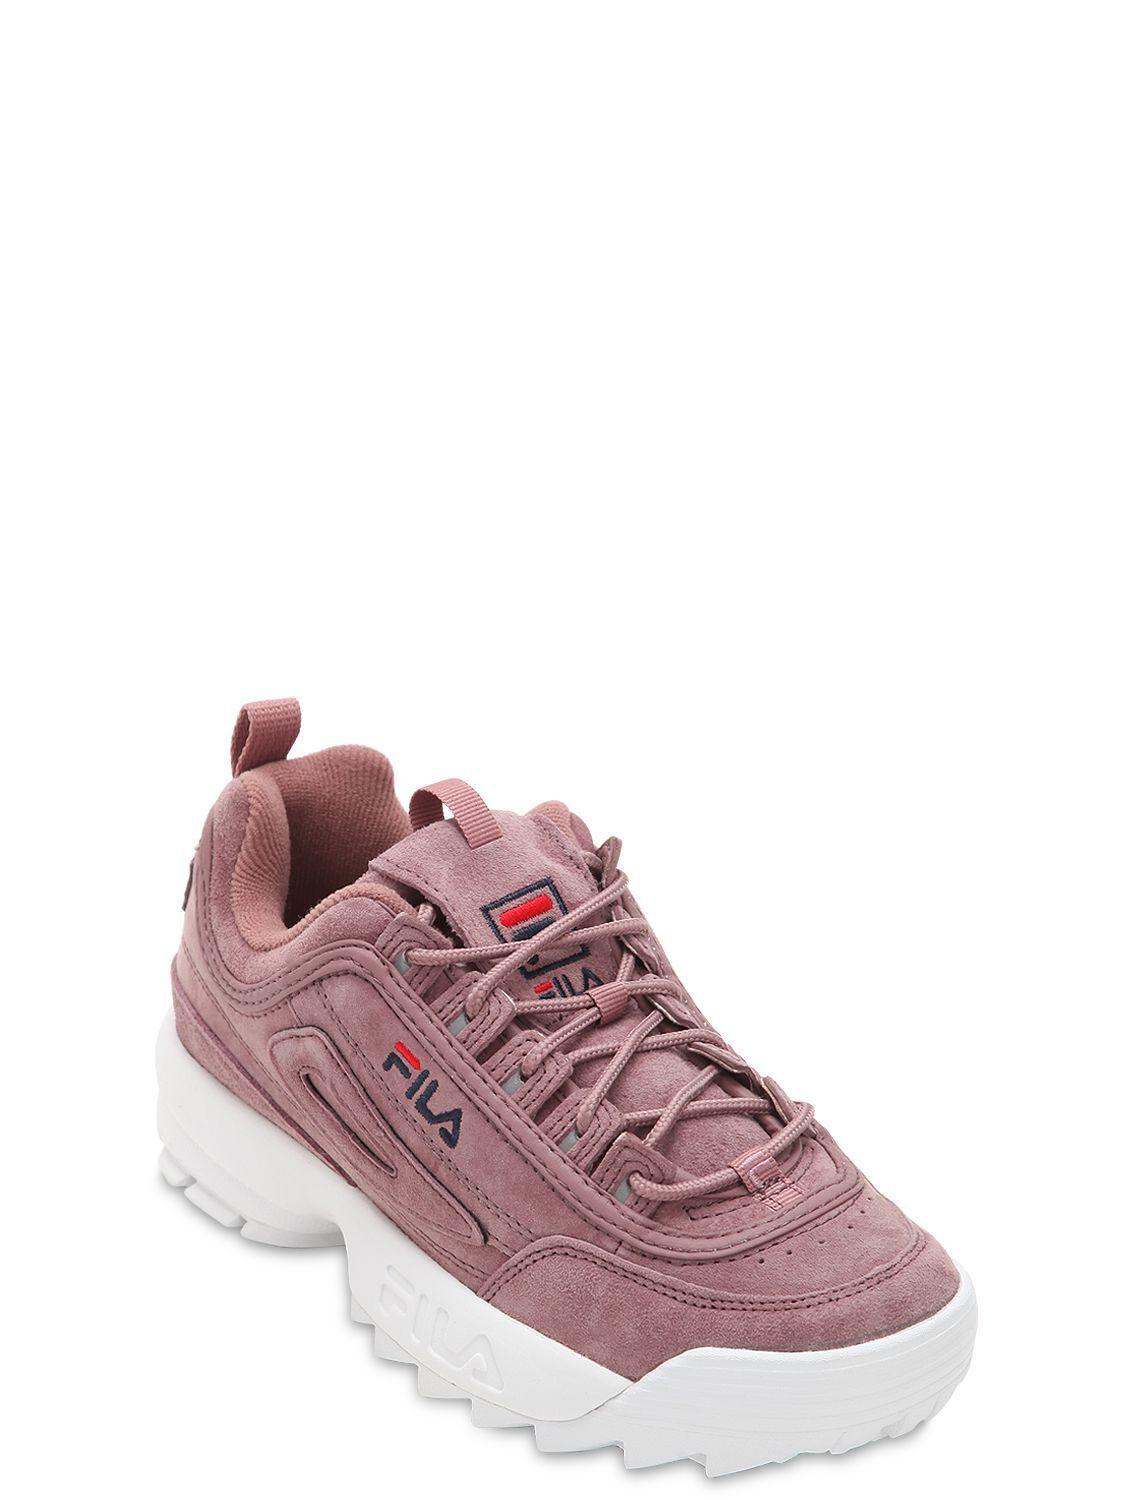 fila pink suede shoes inexpensive 1c8cf 